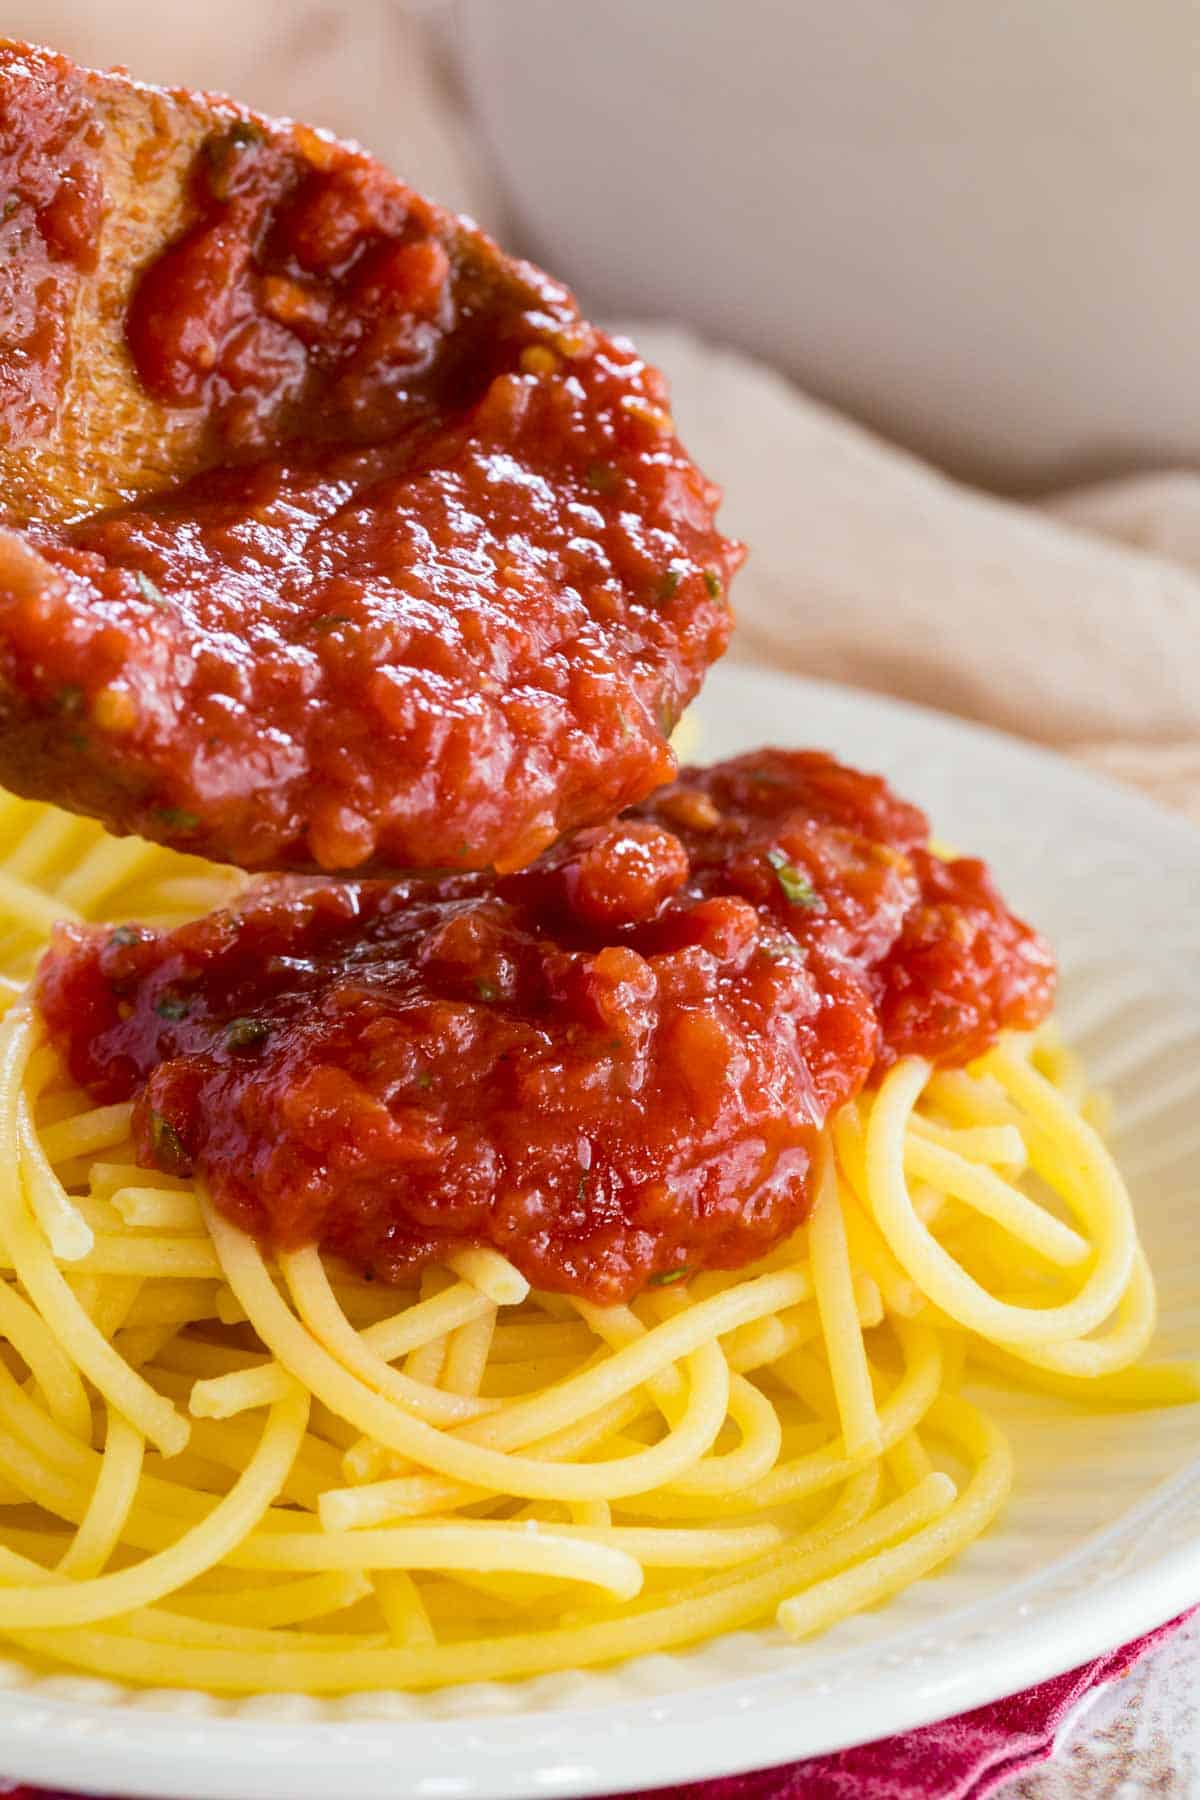 Marinara sauce is spooned over top a bed of spaghetti noodles.